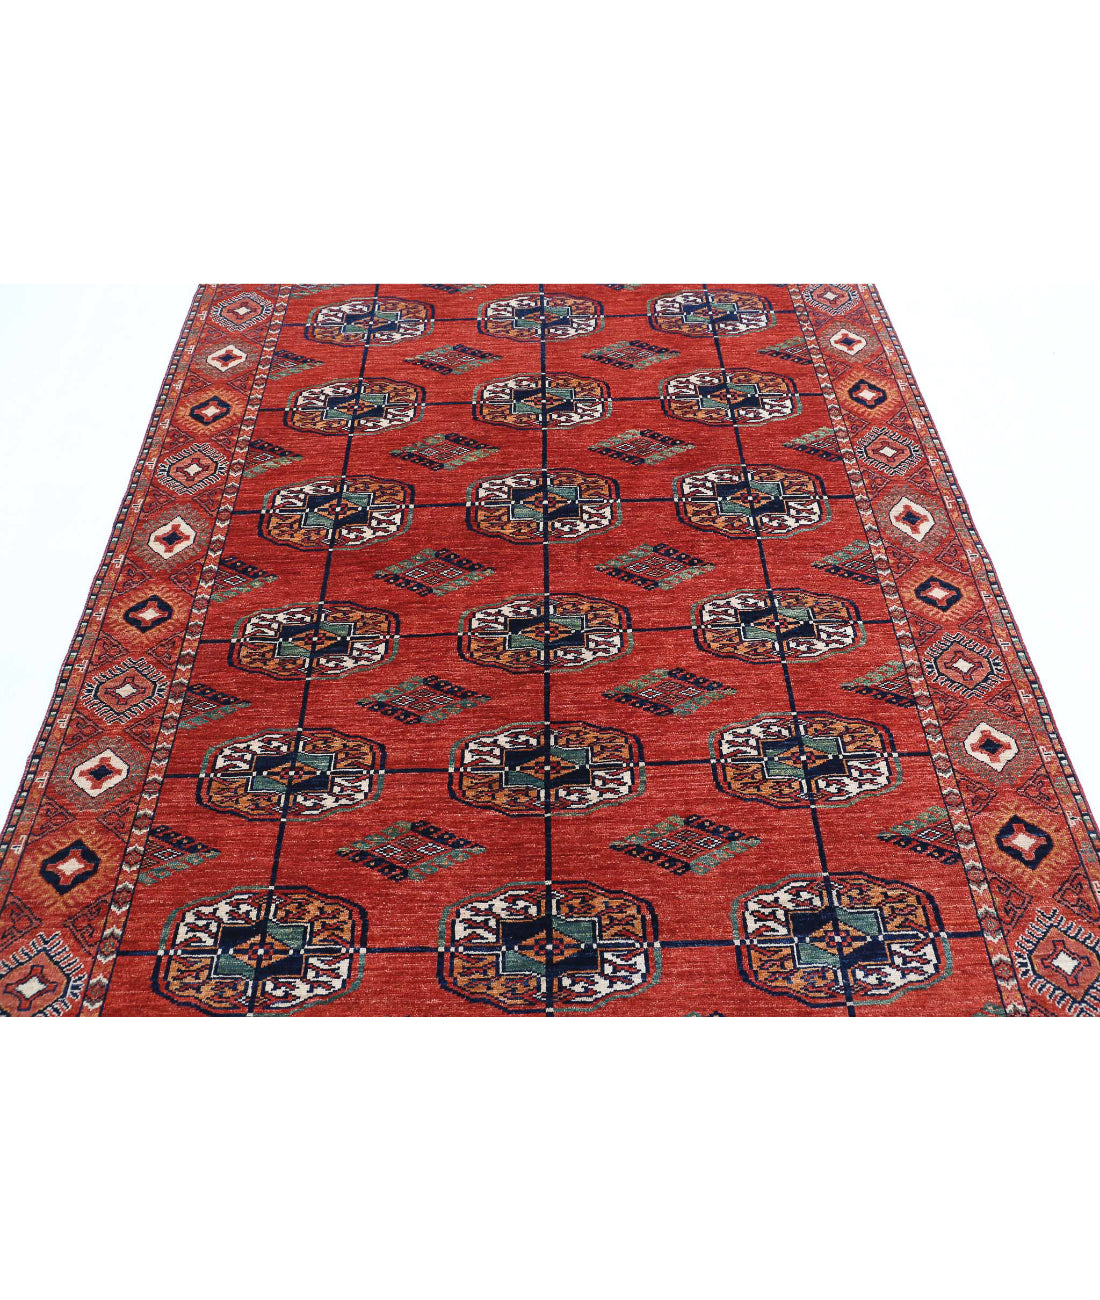 Hand Knotted Nomadic Caucasian Humna Wool Rug - 5'8'' x 7'9'' 5'8'' x 7'9'' (170 X 233) / Rust / Blue